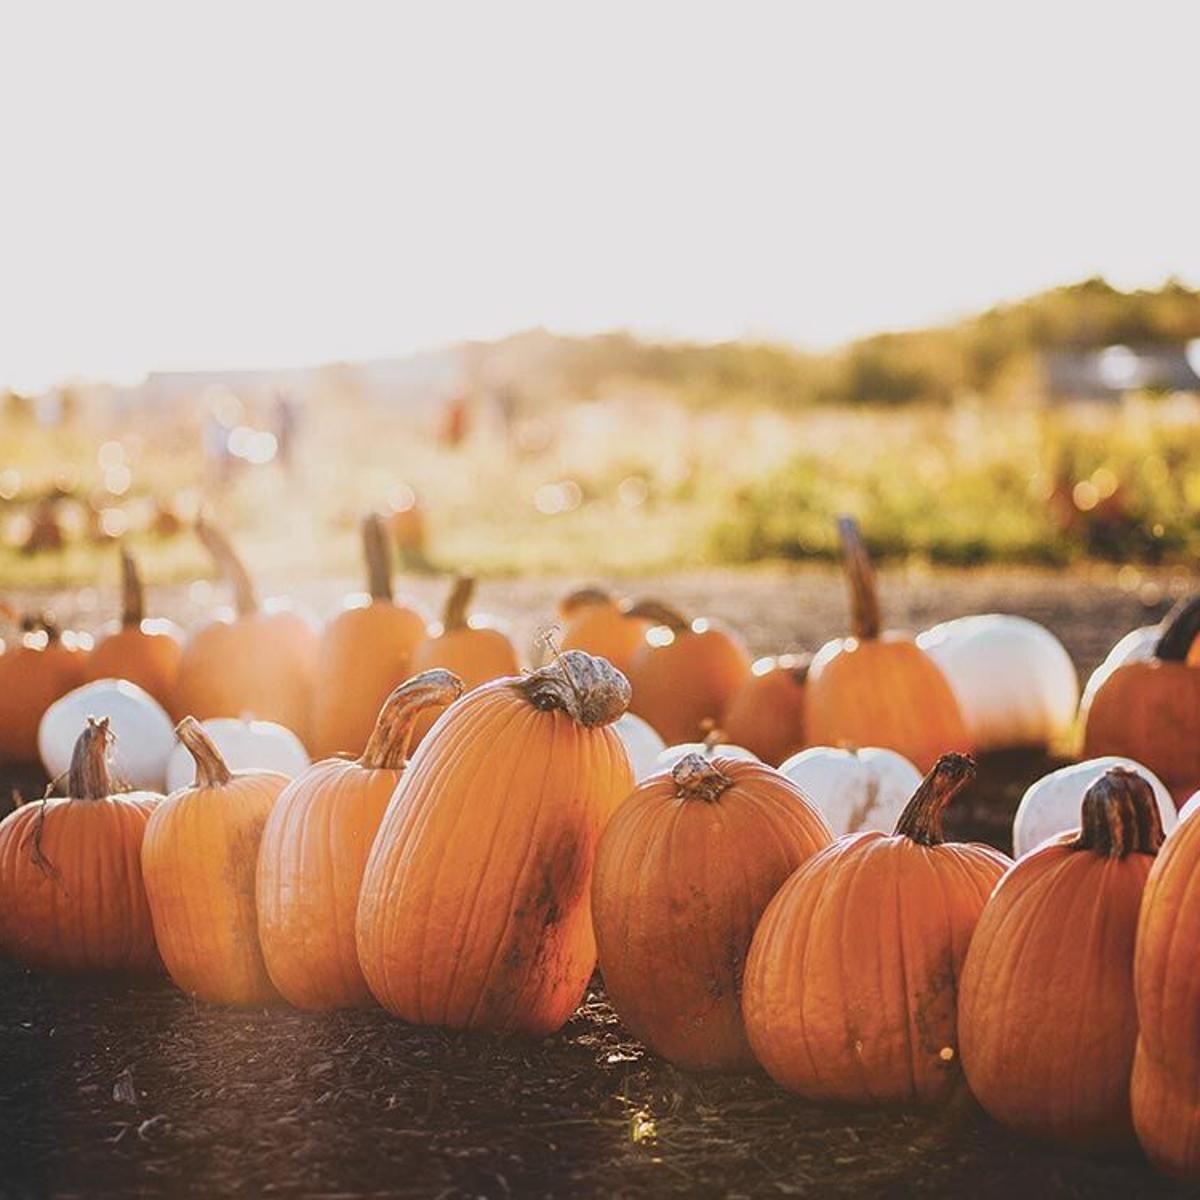 A pumpkin patch with a row of pumpkins in the foreground - Pumpkin